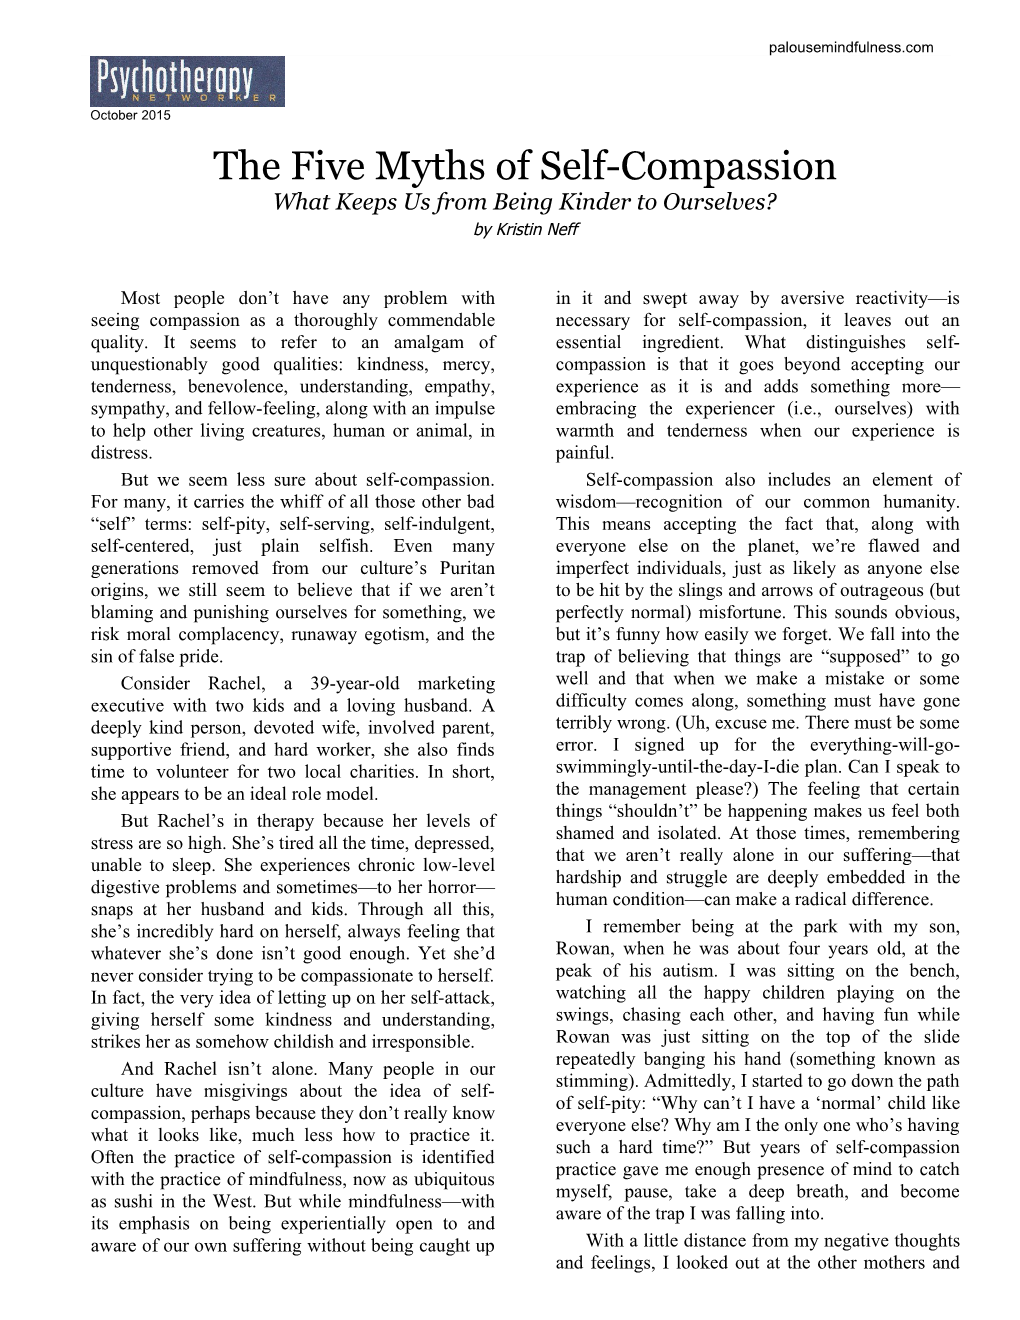 The Five Myths of Self-Compassion